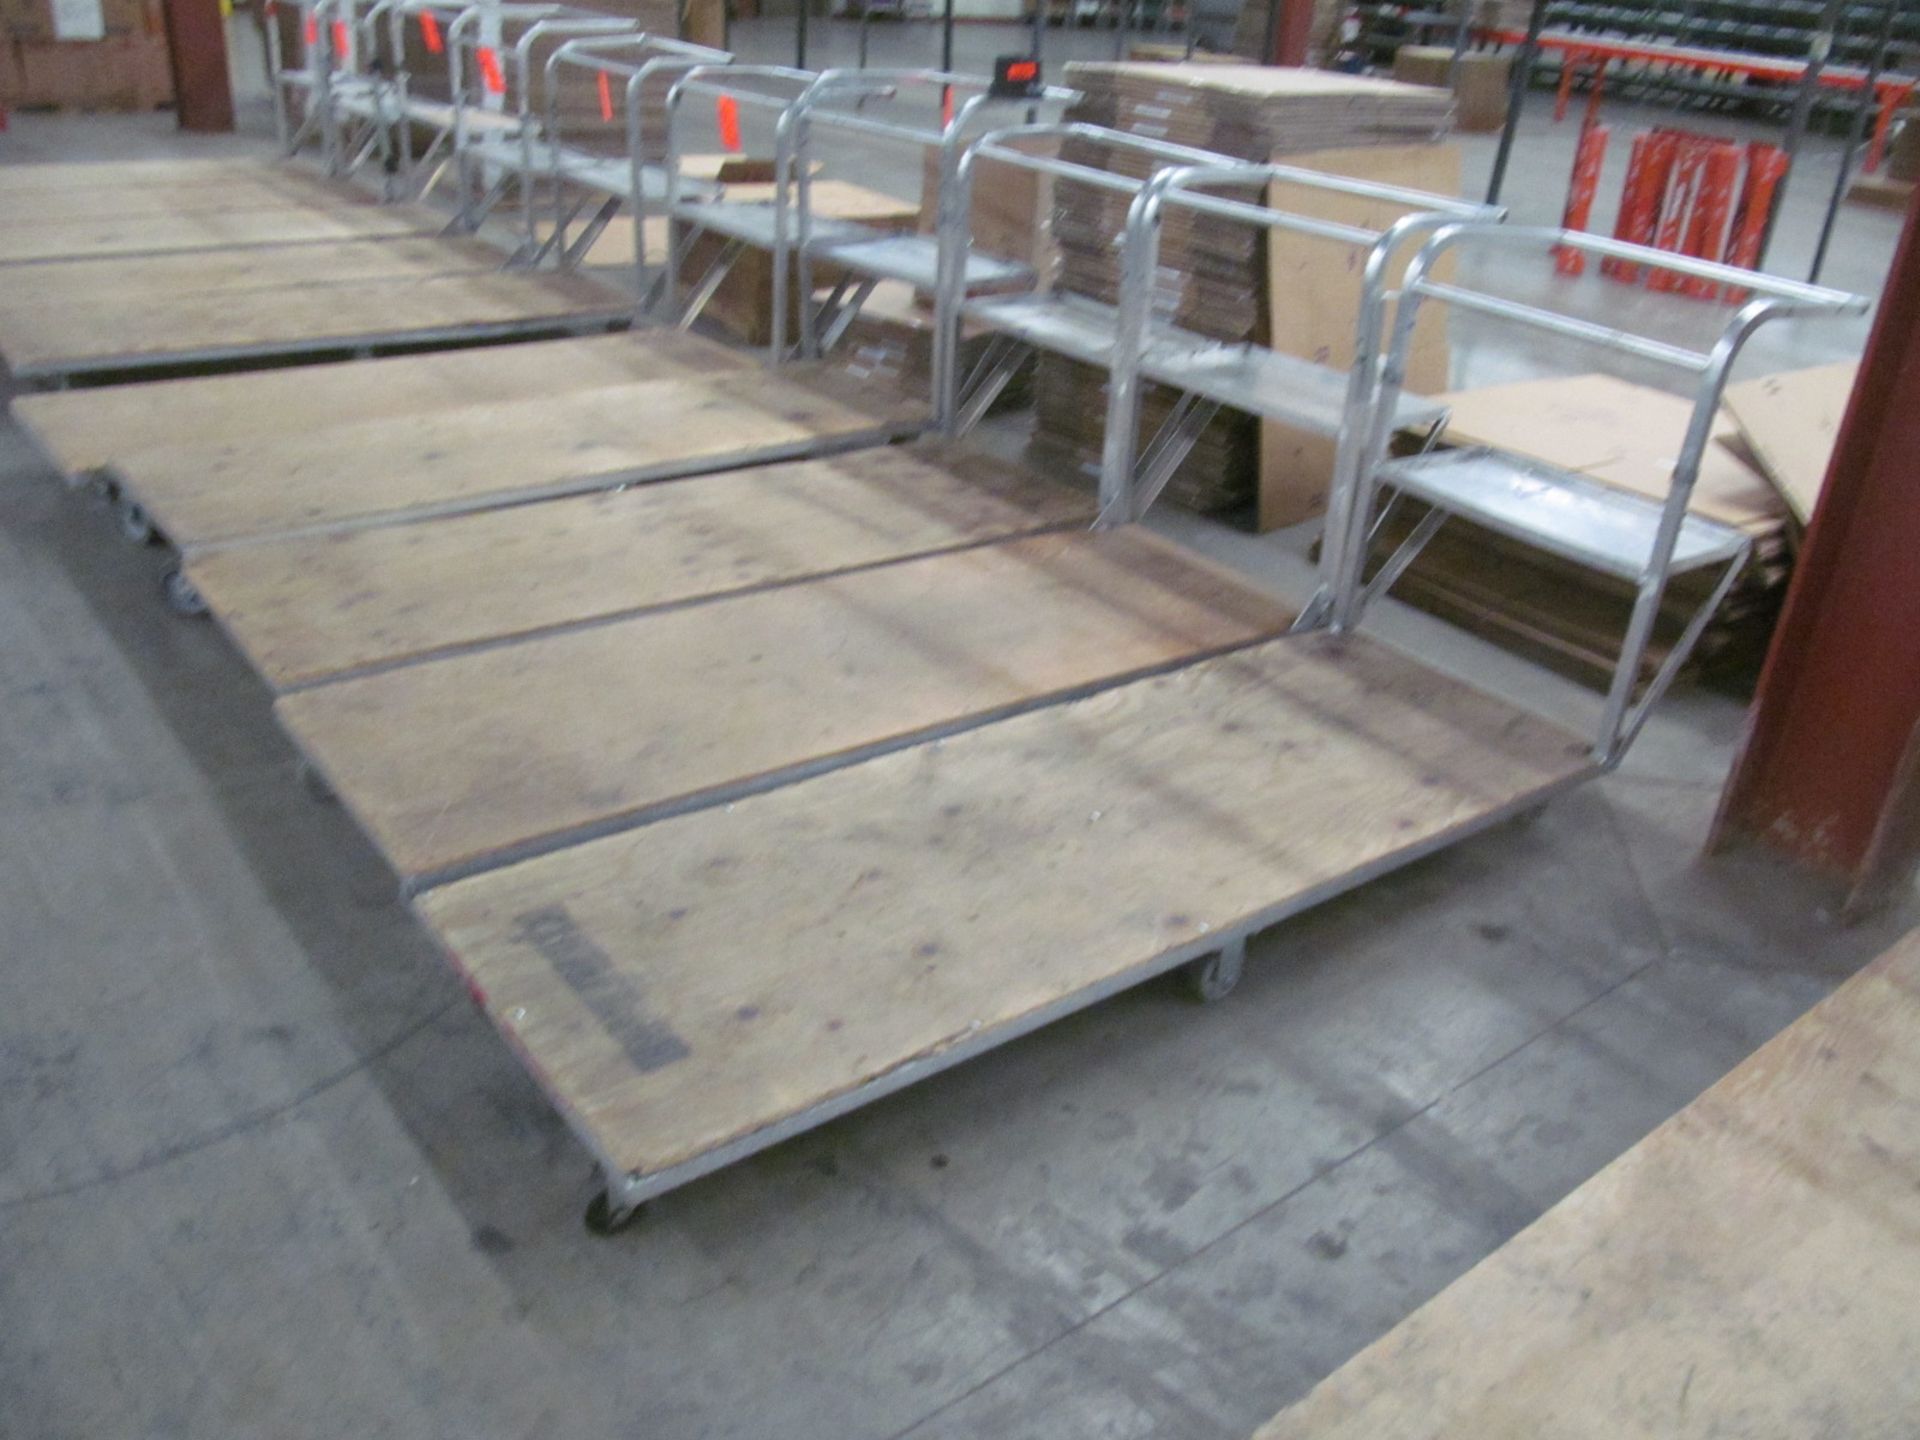 Lot of (5) aluminum framed, wood platform, 24" x 72" specialty shop carts with handle and